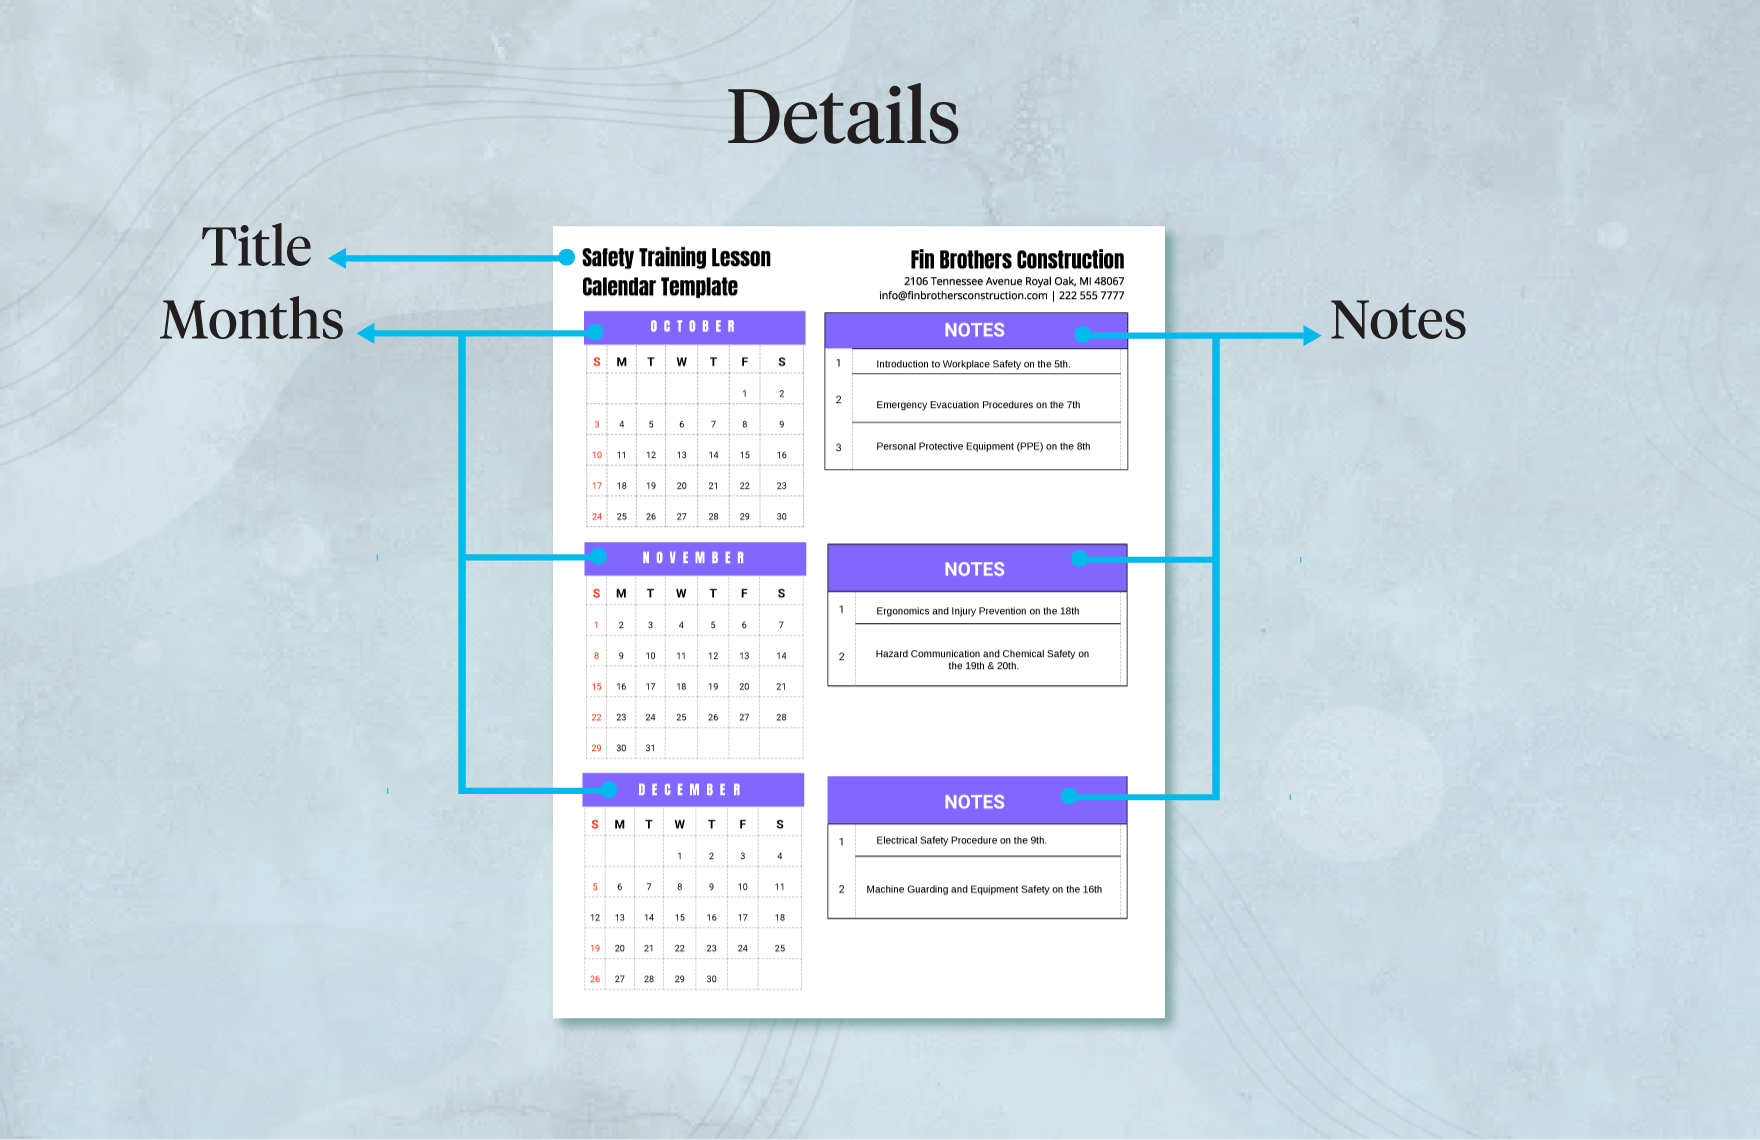 Safety Training Lesson Calendar Template